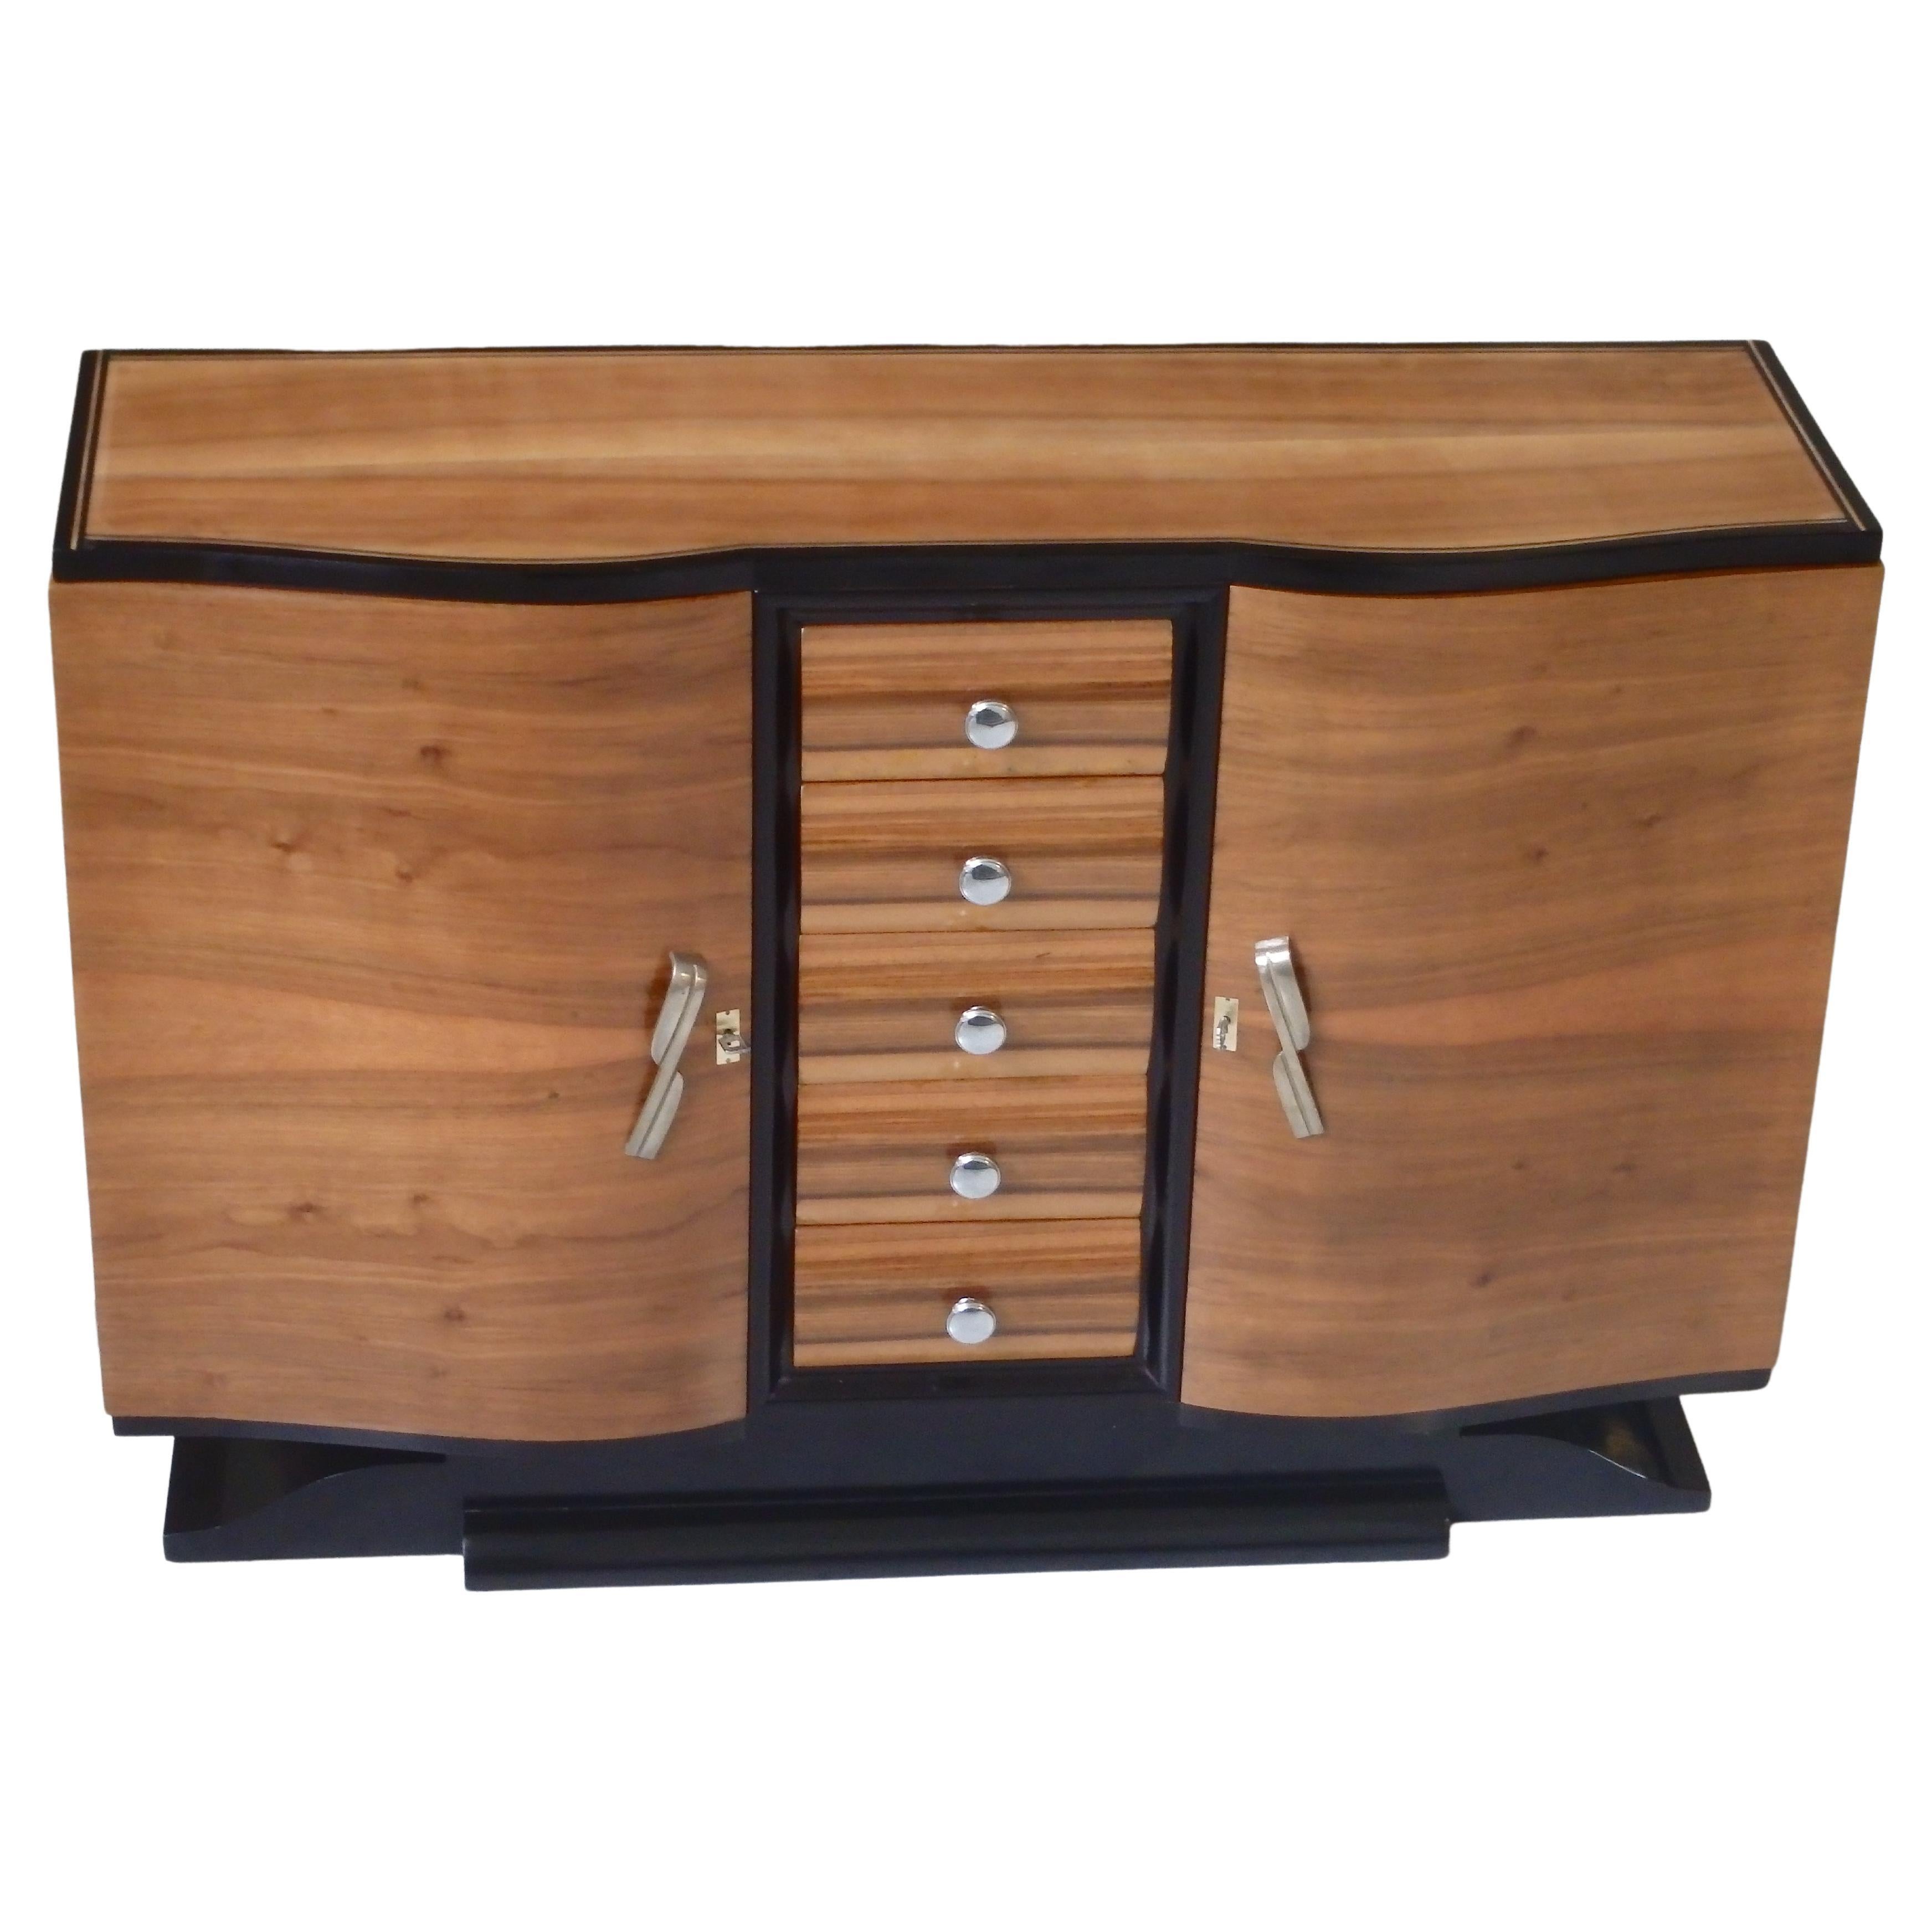 Art Deco Sideboard with 5 Drawers Rounded Doors Chrome Handles Mustache Foot For Sale